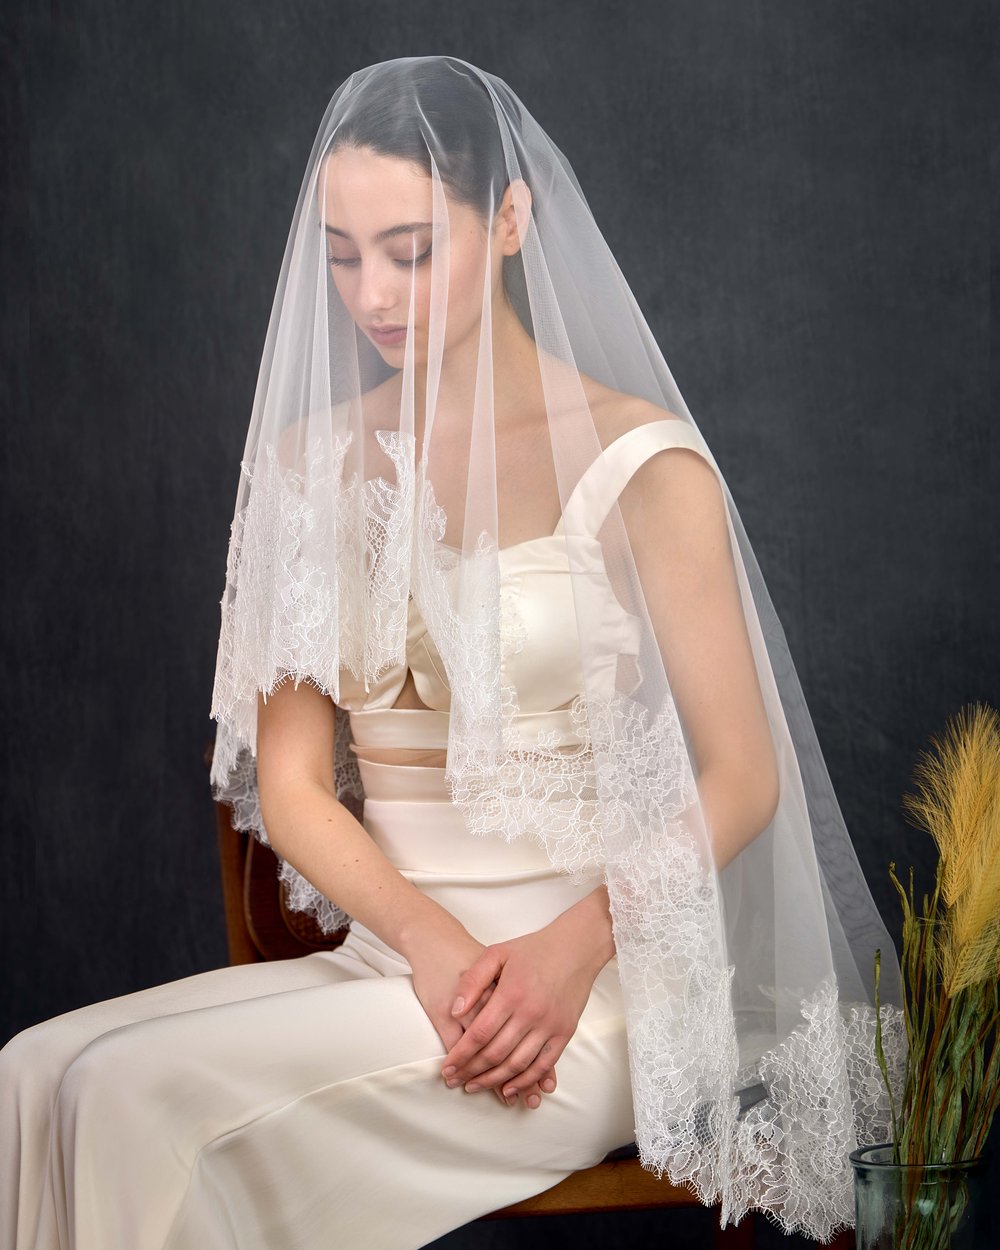 One Blushing Bride Peace - Fingertip Length Wedding Veil with Scalloped French Lace Trim White / Fingertip 38-40 inch / Beading